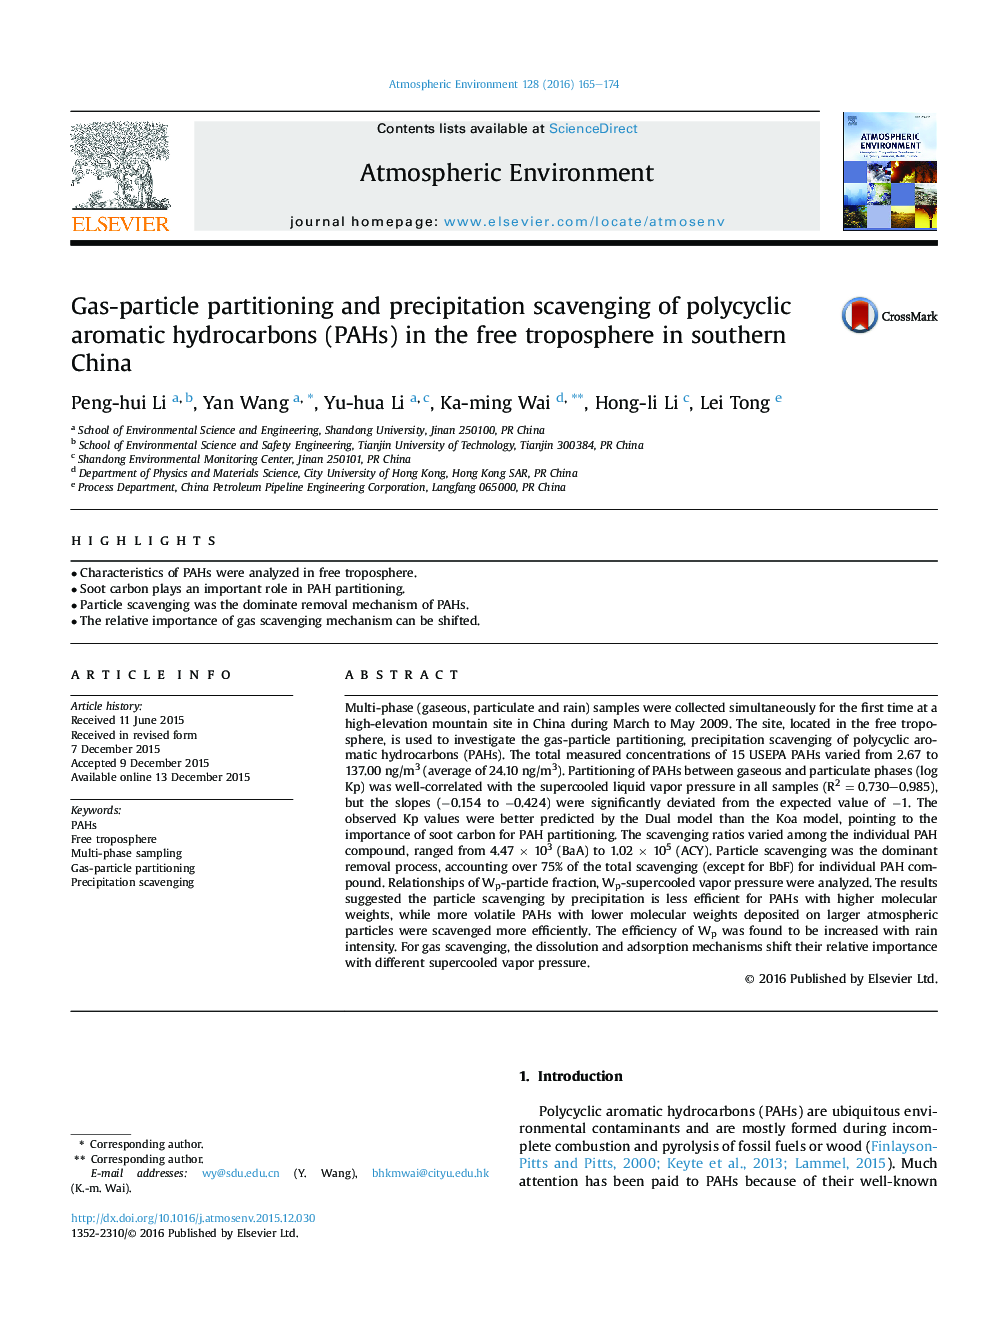 Gas-particle partitioning and precipitation scavenging of polycyclic aromatic hydrocarbons (PAHs) in the free troposphere in southern China